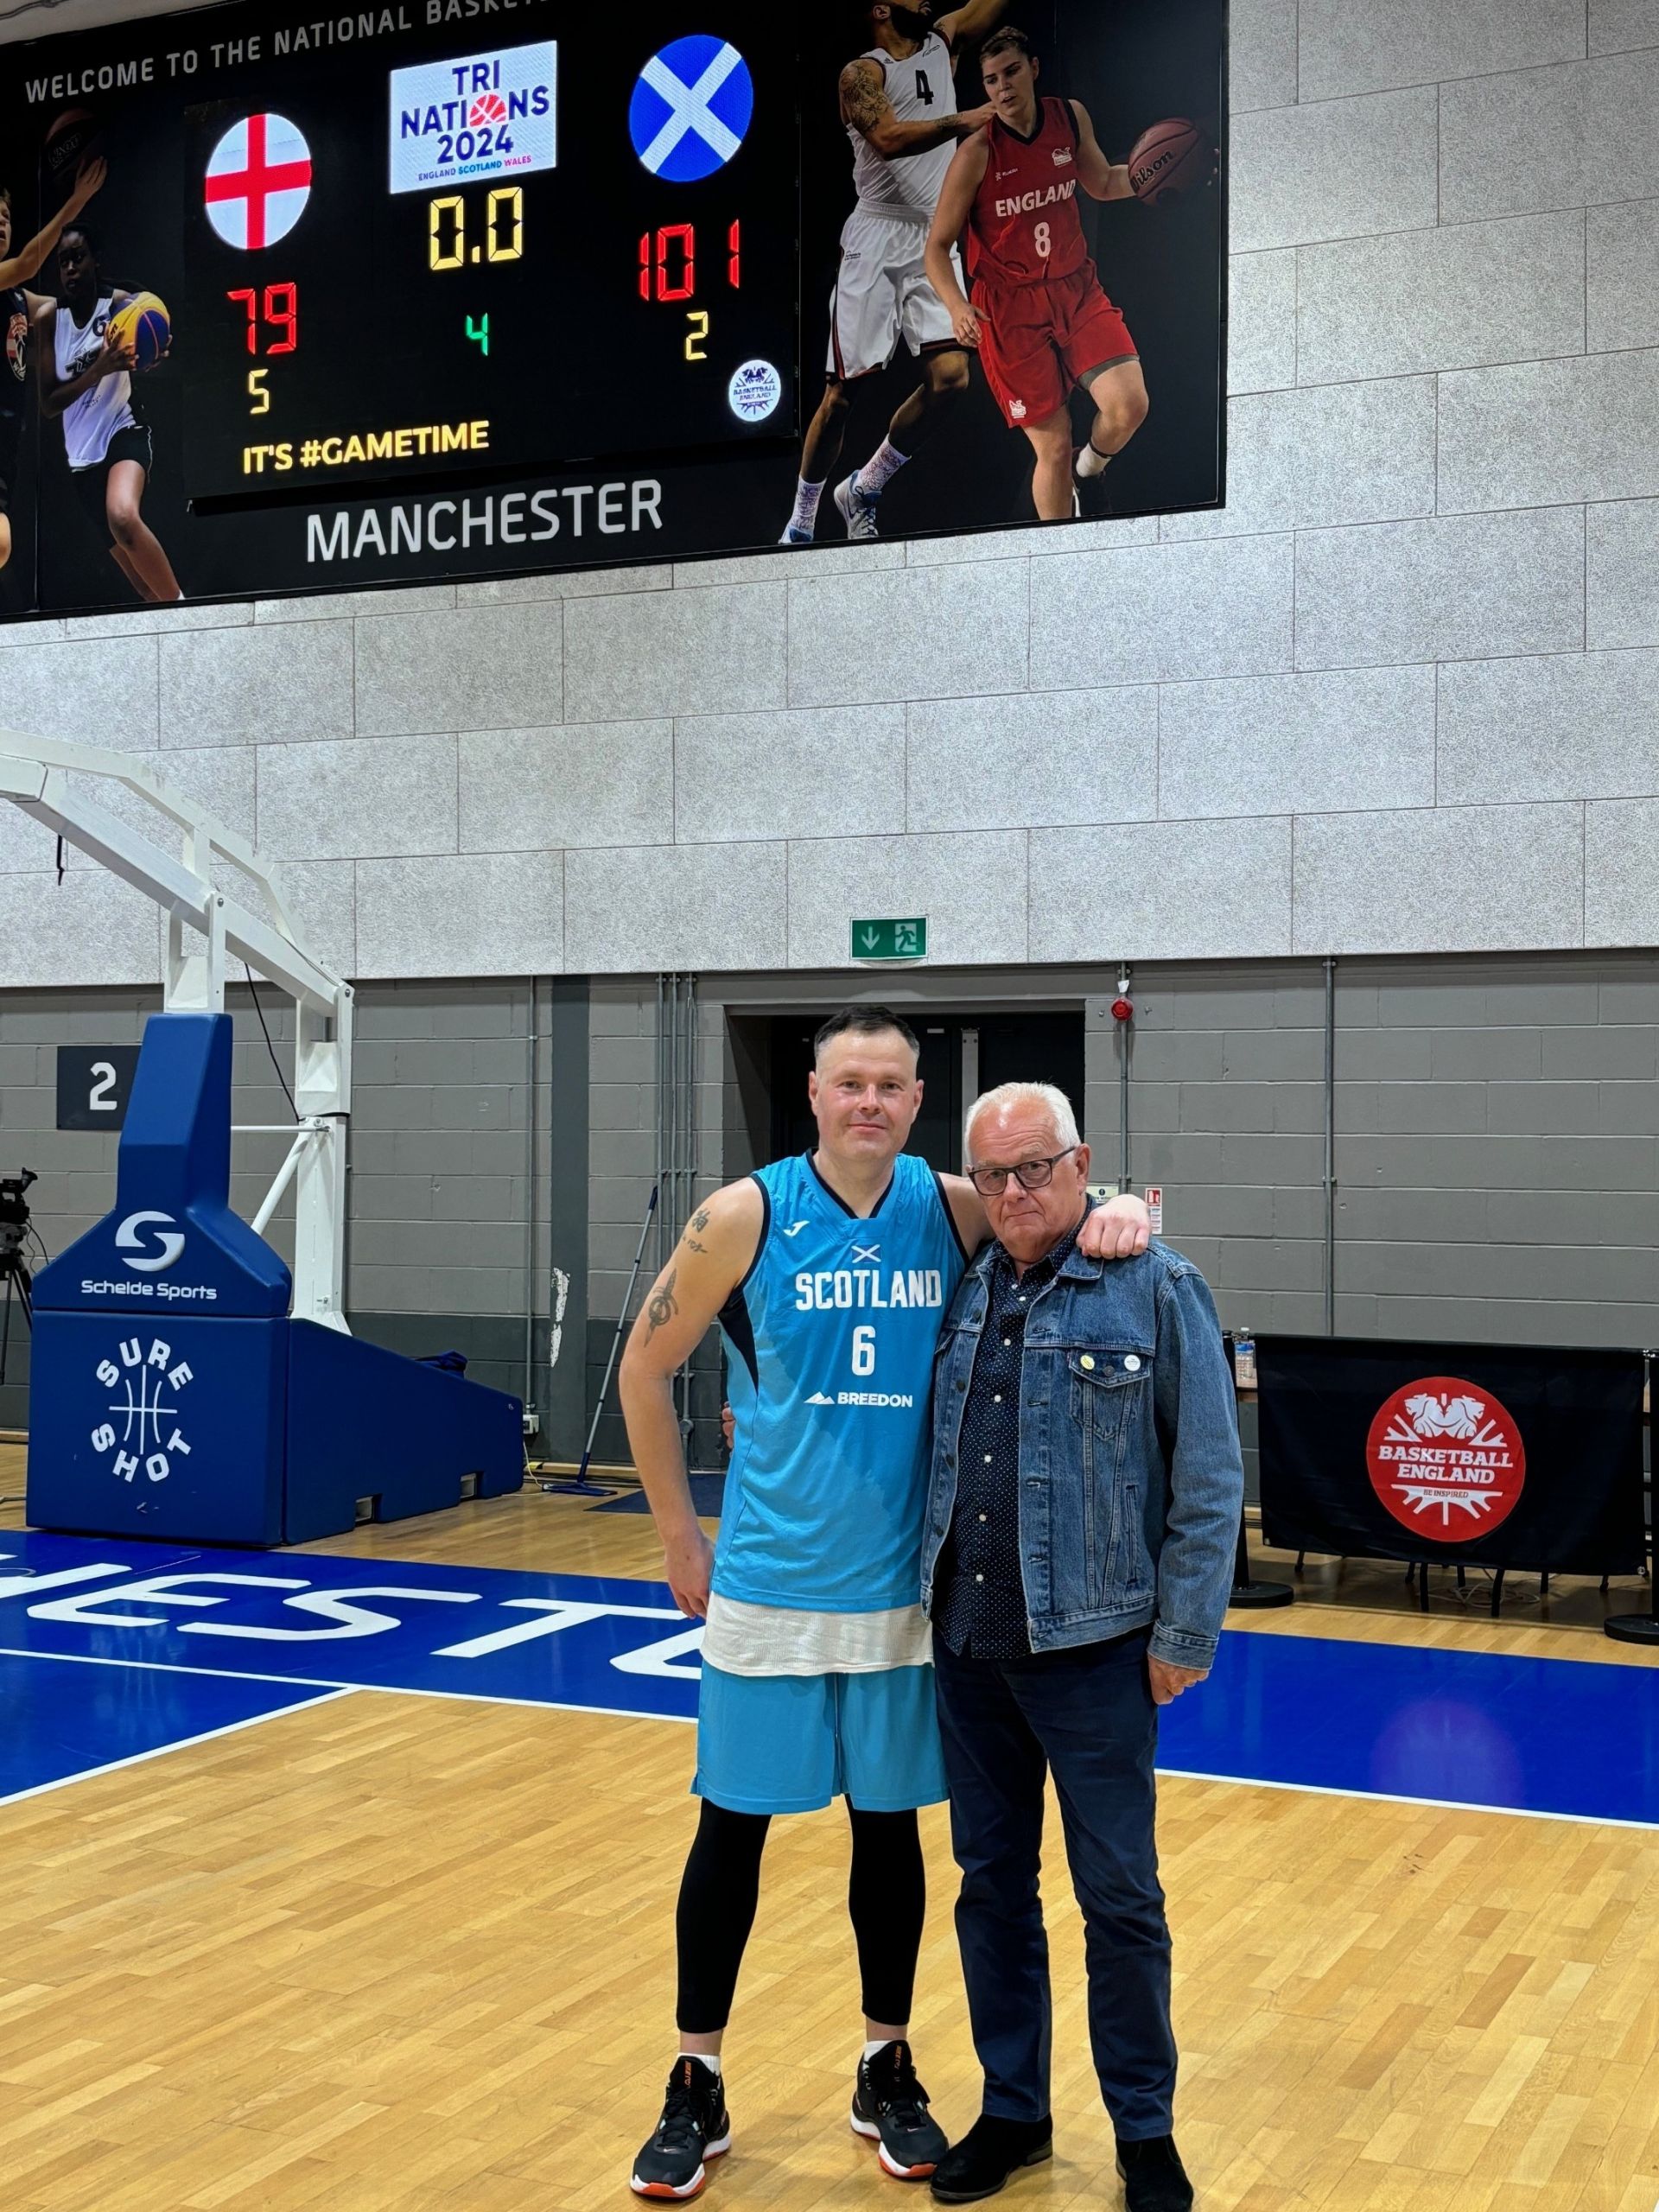 Graham Hunter from CLD with his dad on basketball court